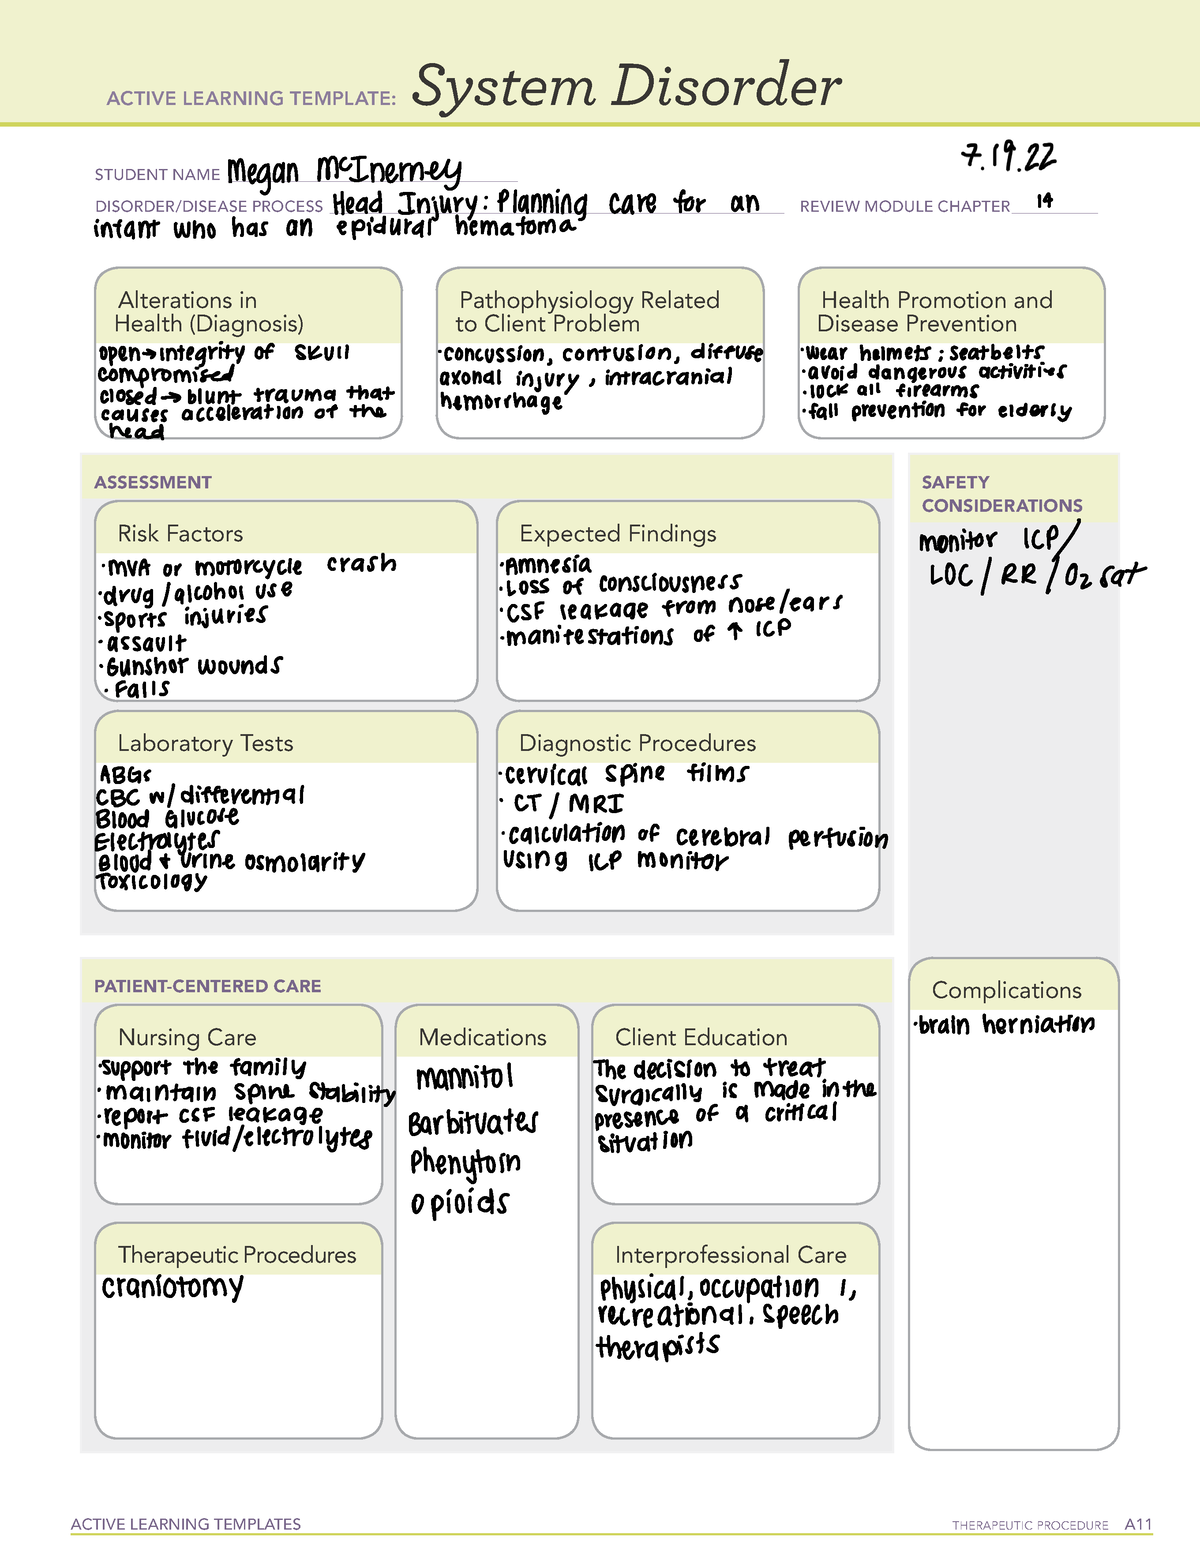 Peds Practice A Remediation ATI Active Learning Templates System